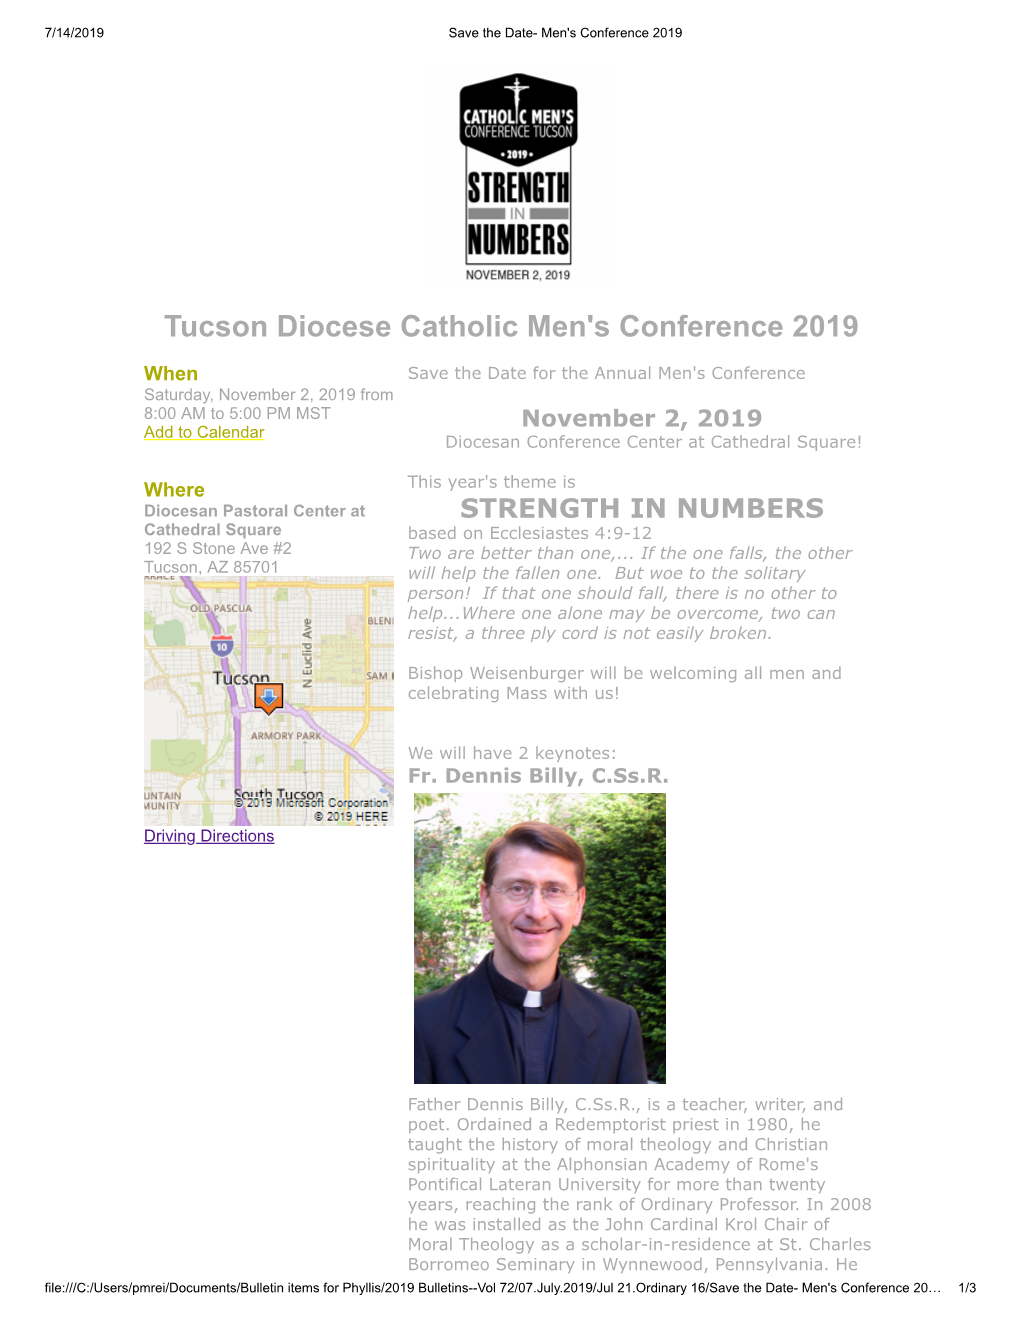 Tucson Diocese Catholic Men's Conference 2019